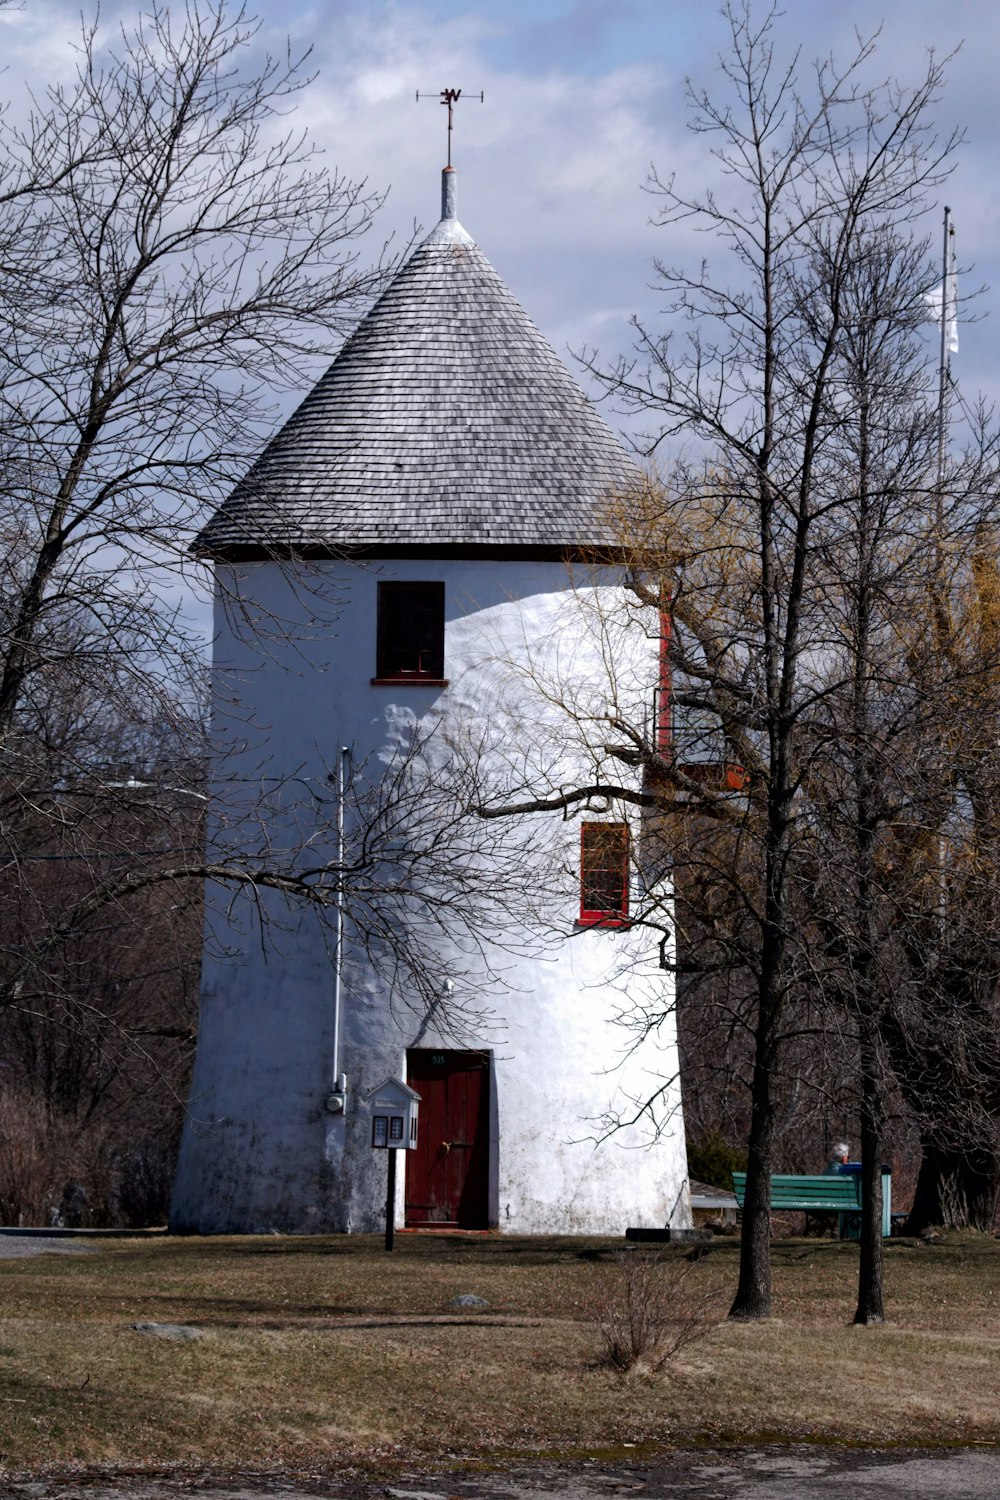 a tall white tower with a red door